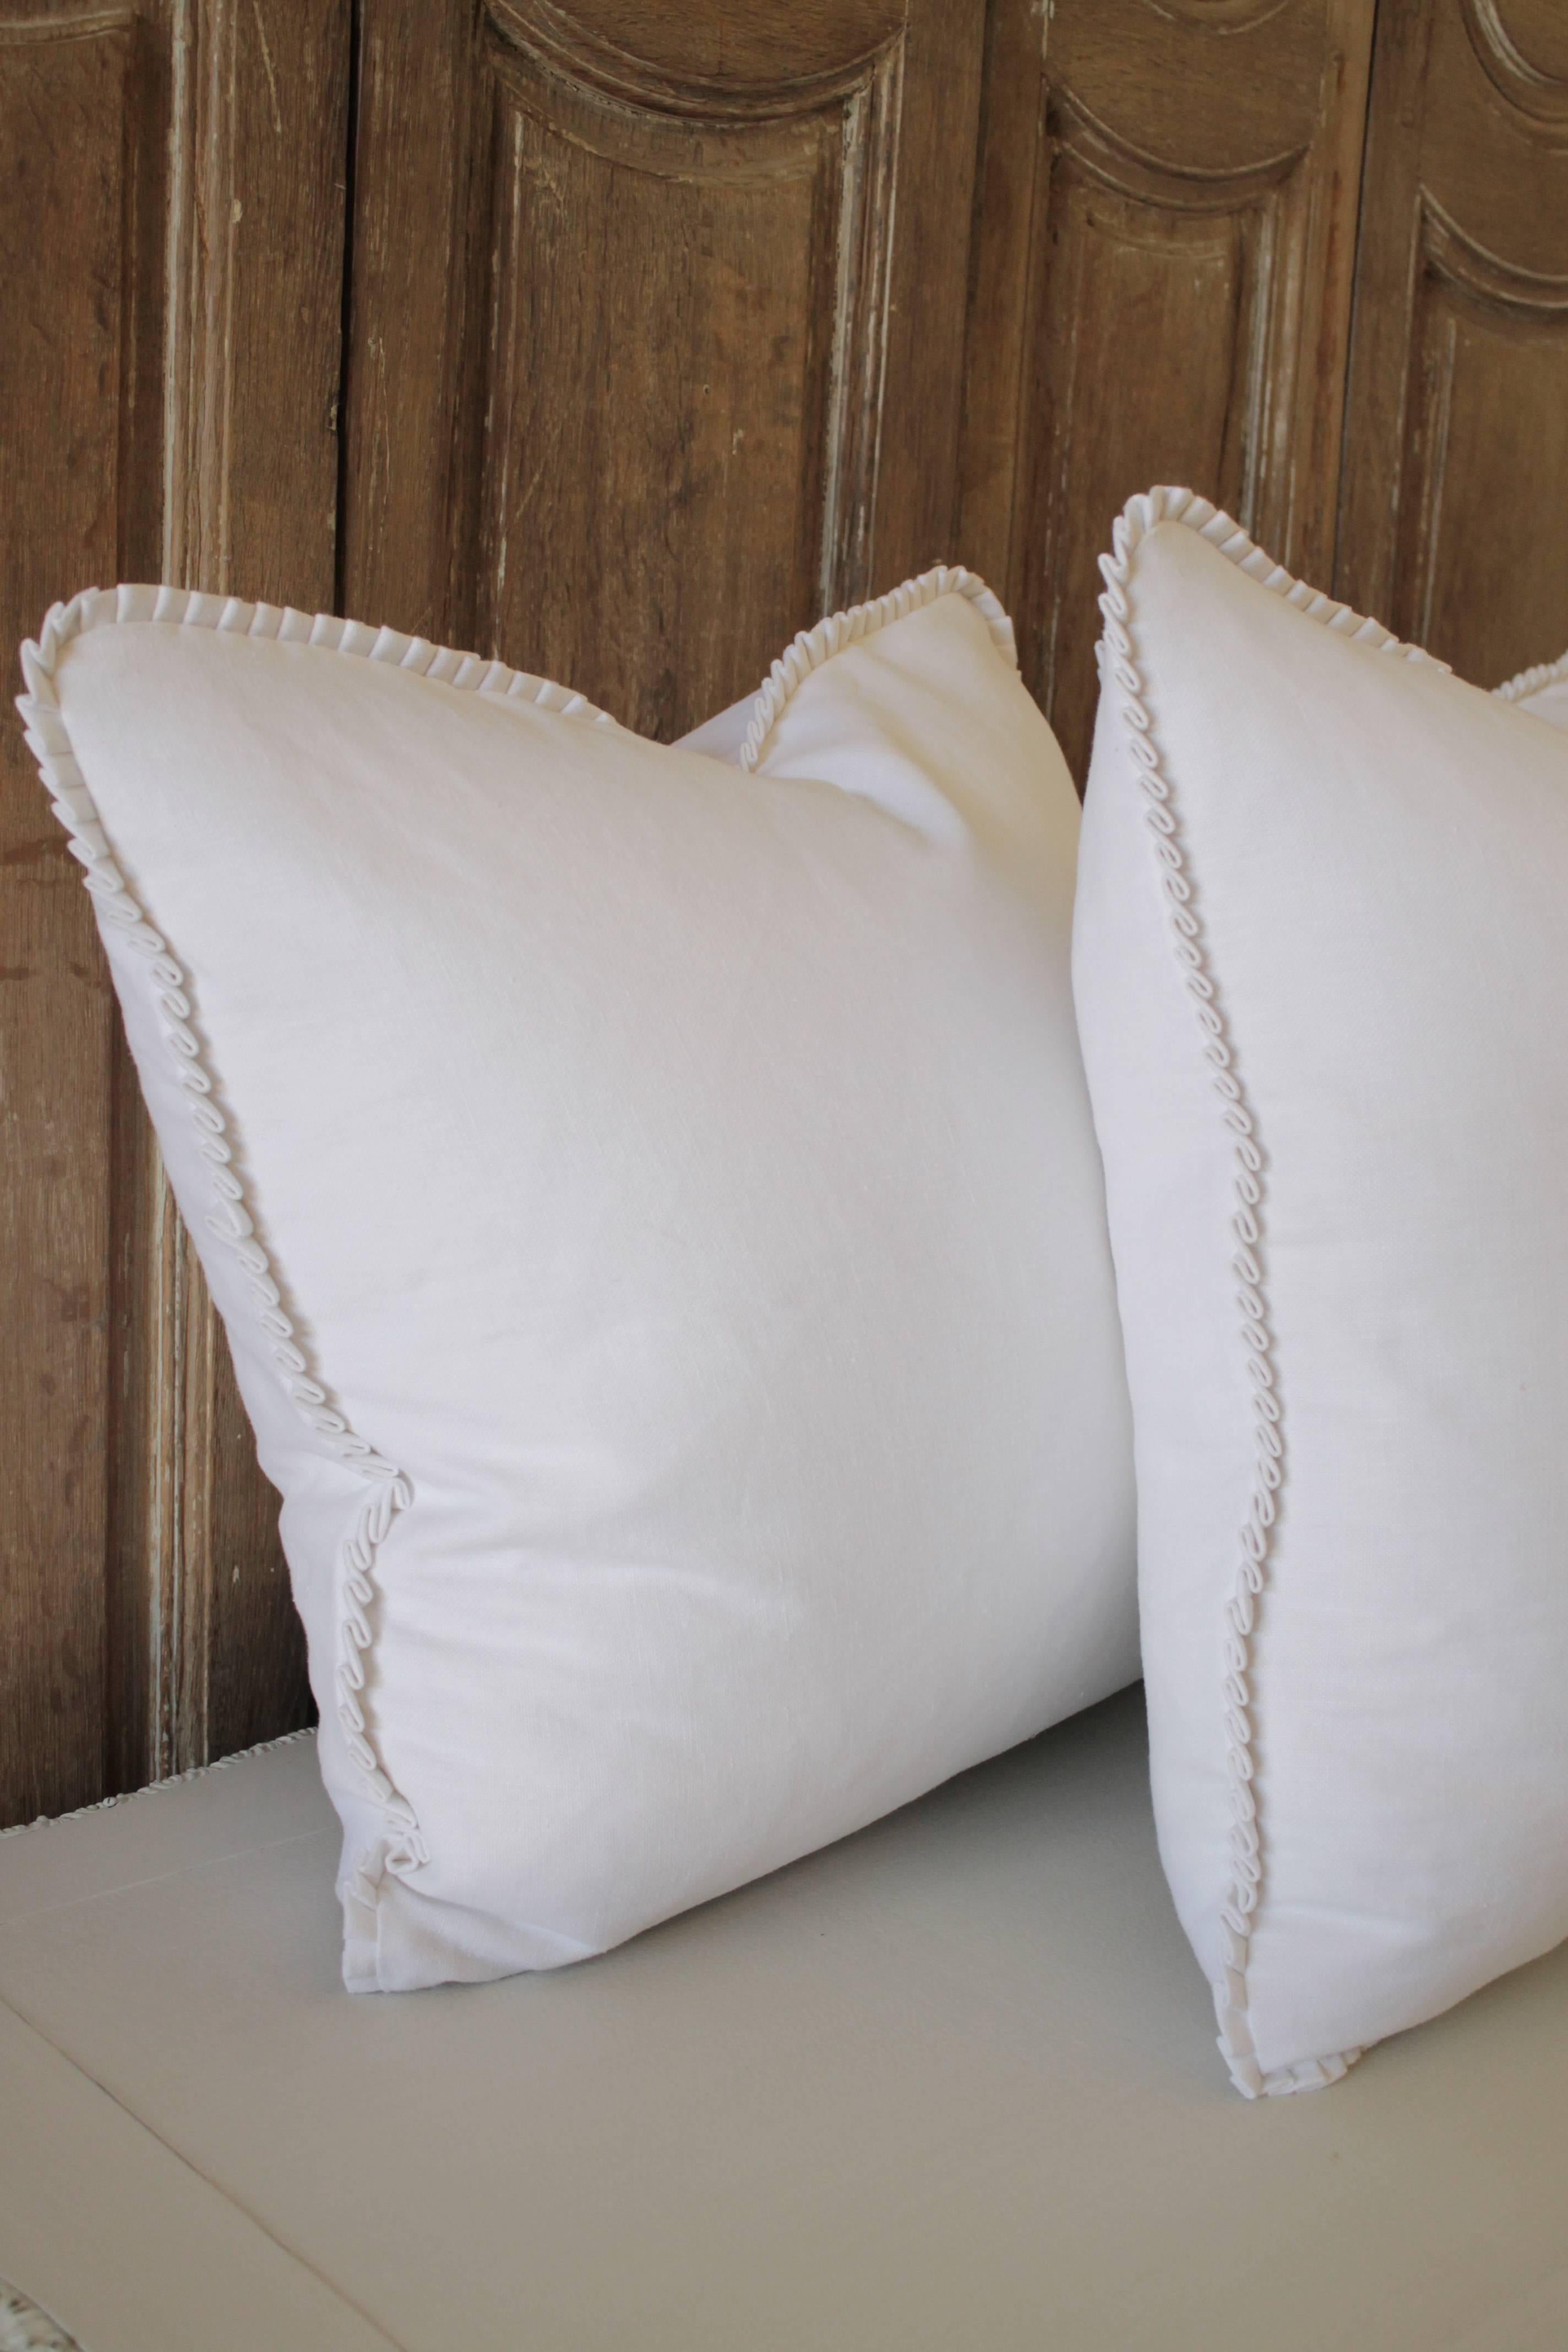 Hand-Crafted Custom-Made Luxury Linen Pillows with Ruffle For Sale